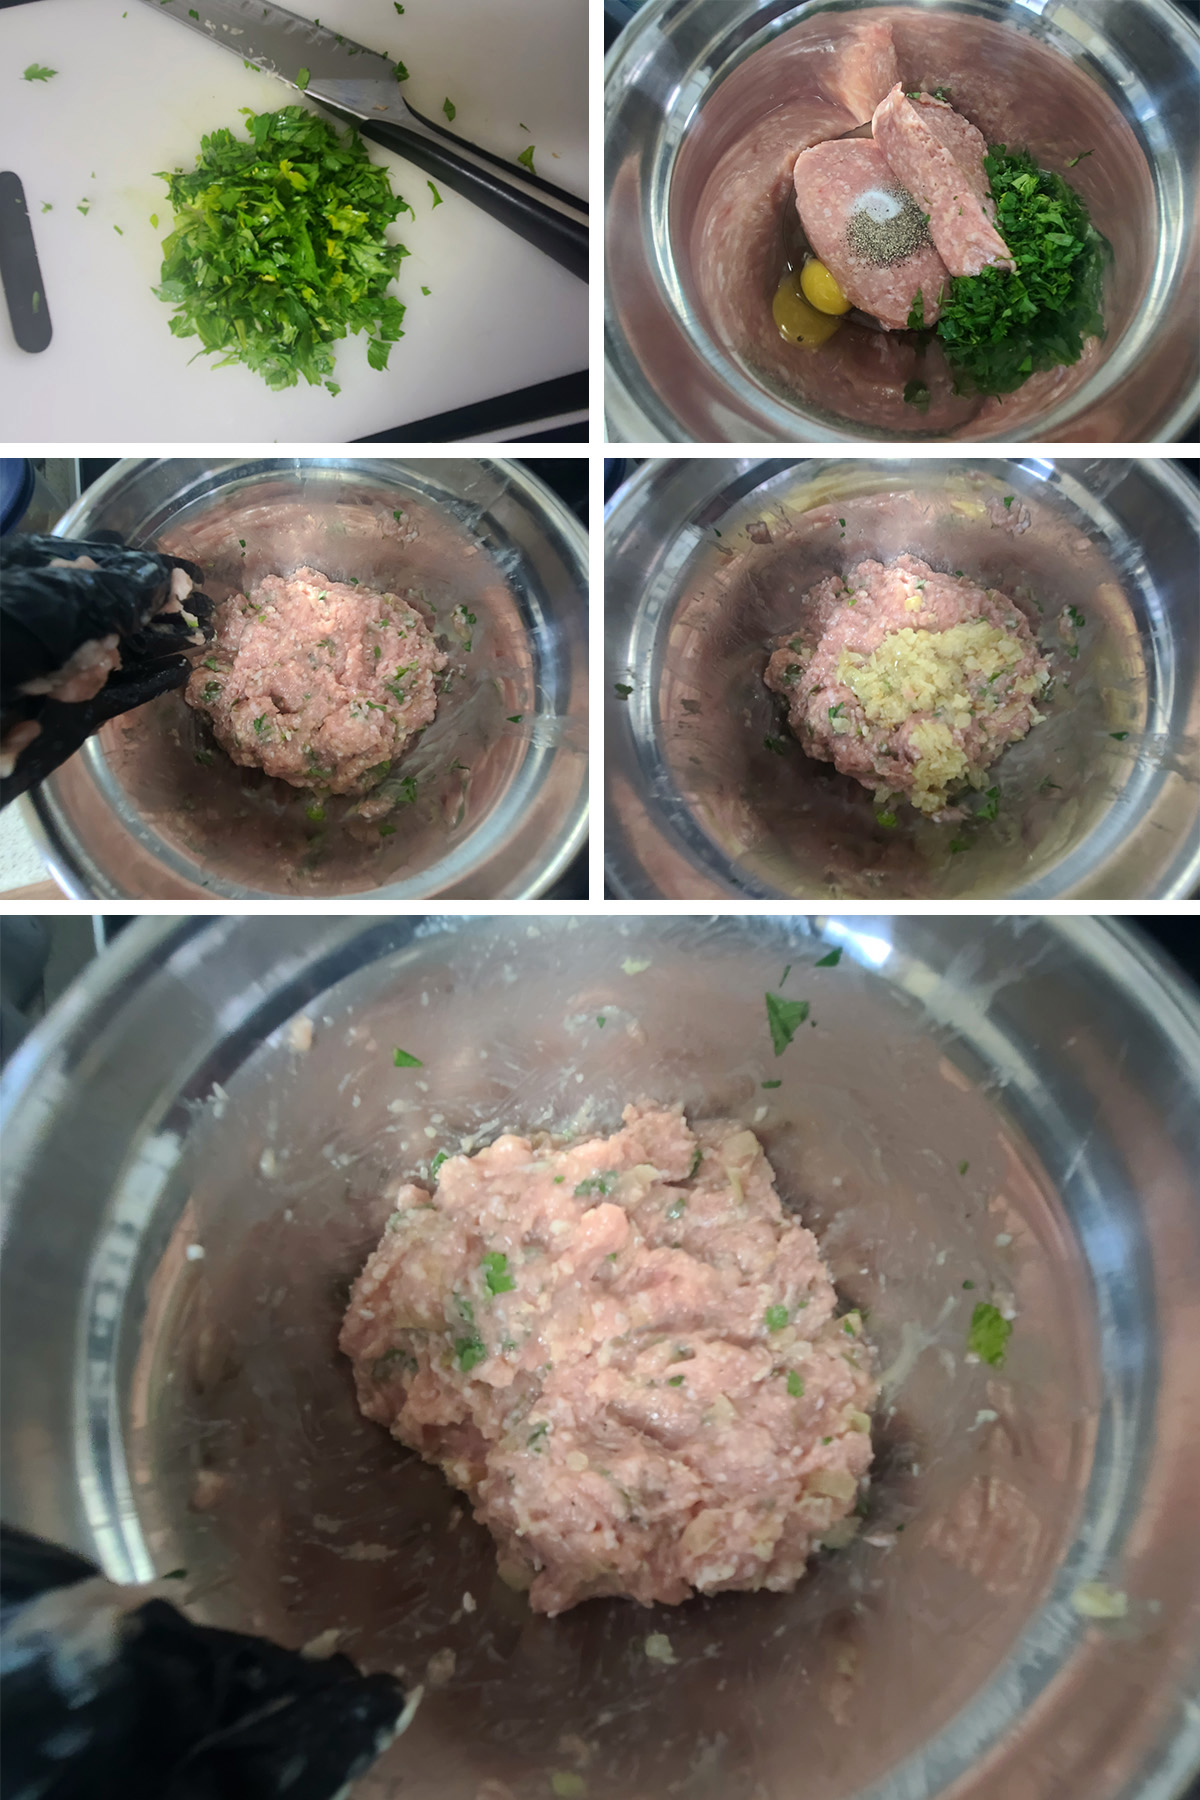 A 5 part image showing the parsley being chopped, and added to the chicken along with the remaining meatloaf ingredients.